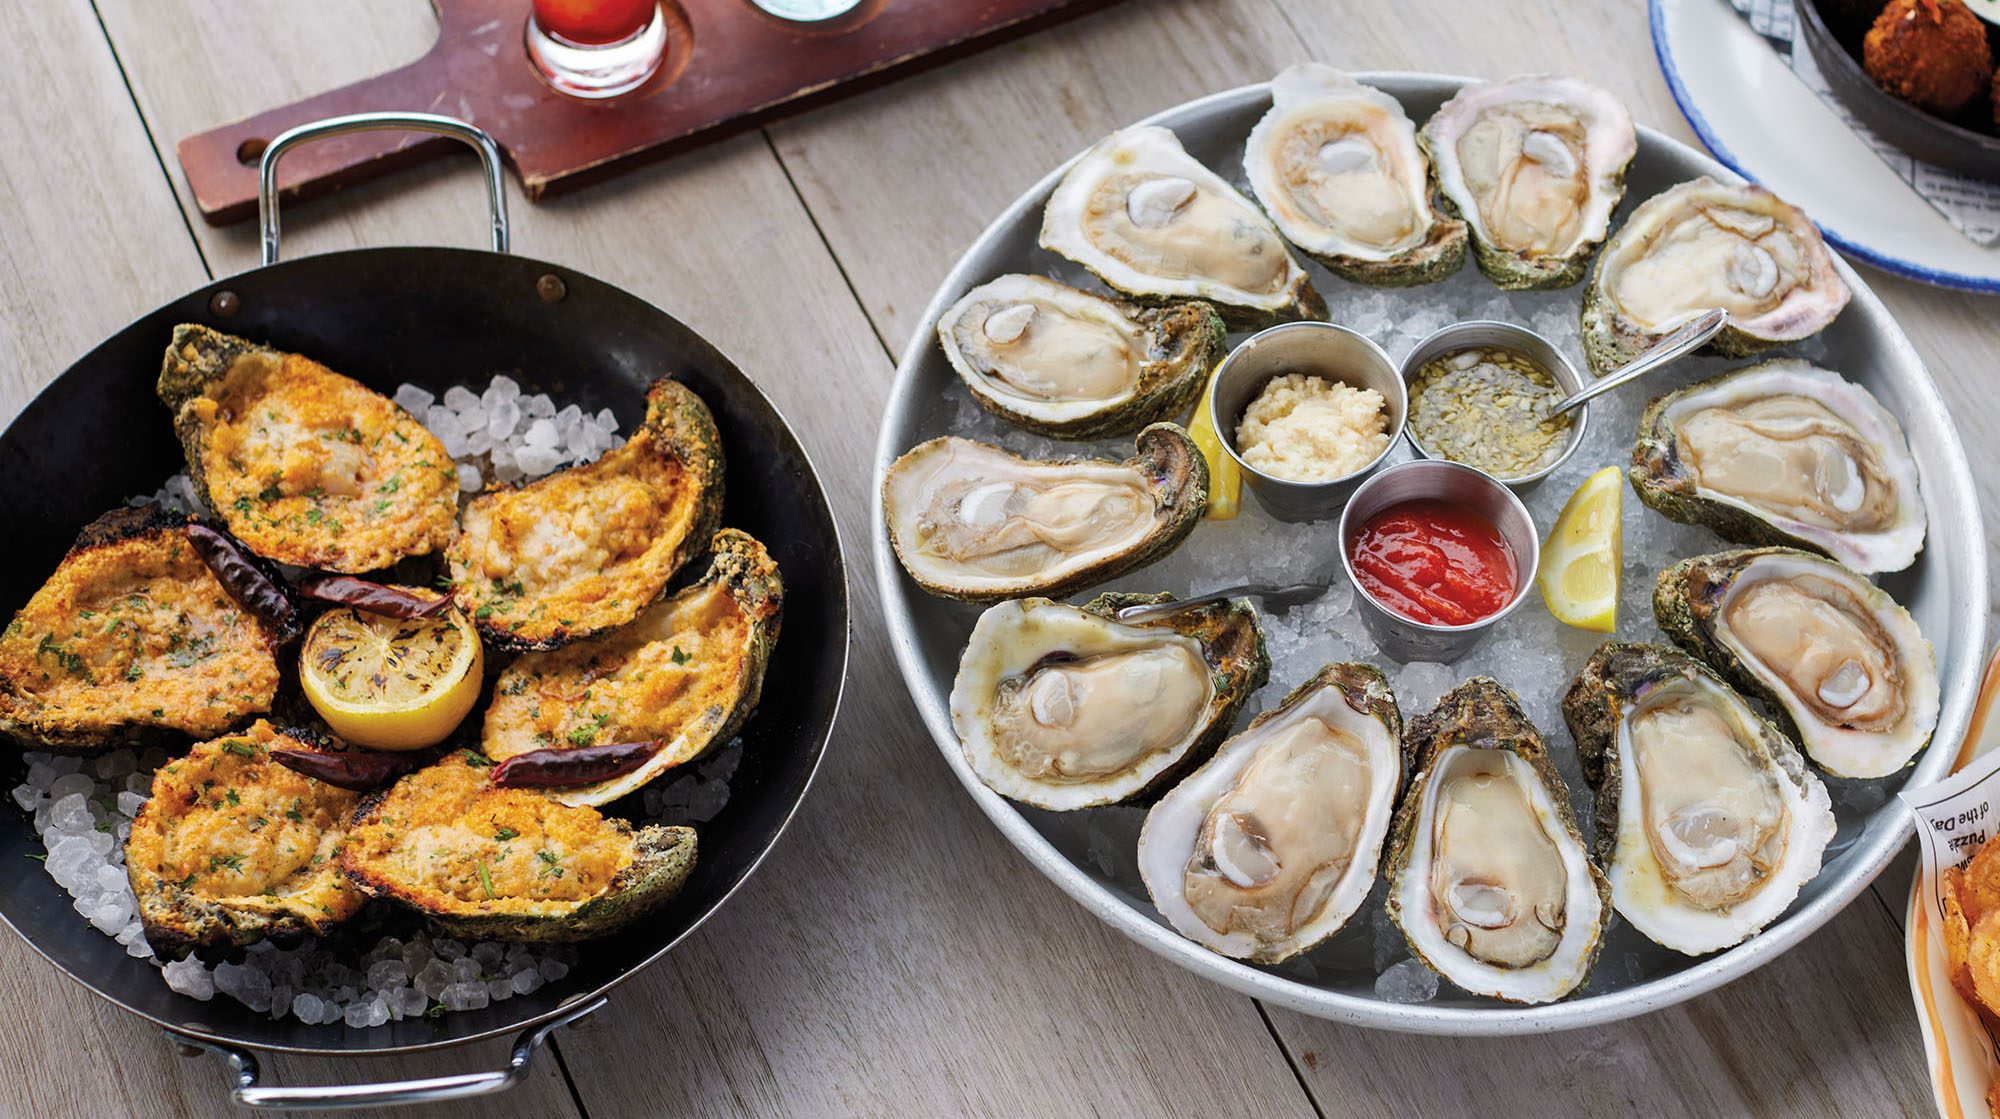 An overhead view of two platters of oysters -- on the left, cooked golden brown oysters and on the right, a plate of raw oysters on the half-shell with traditional cocktail sauces